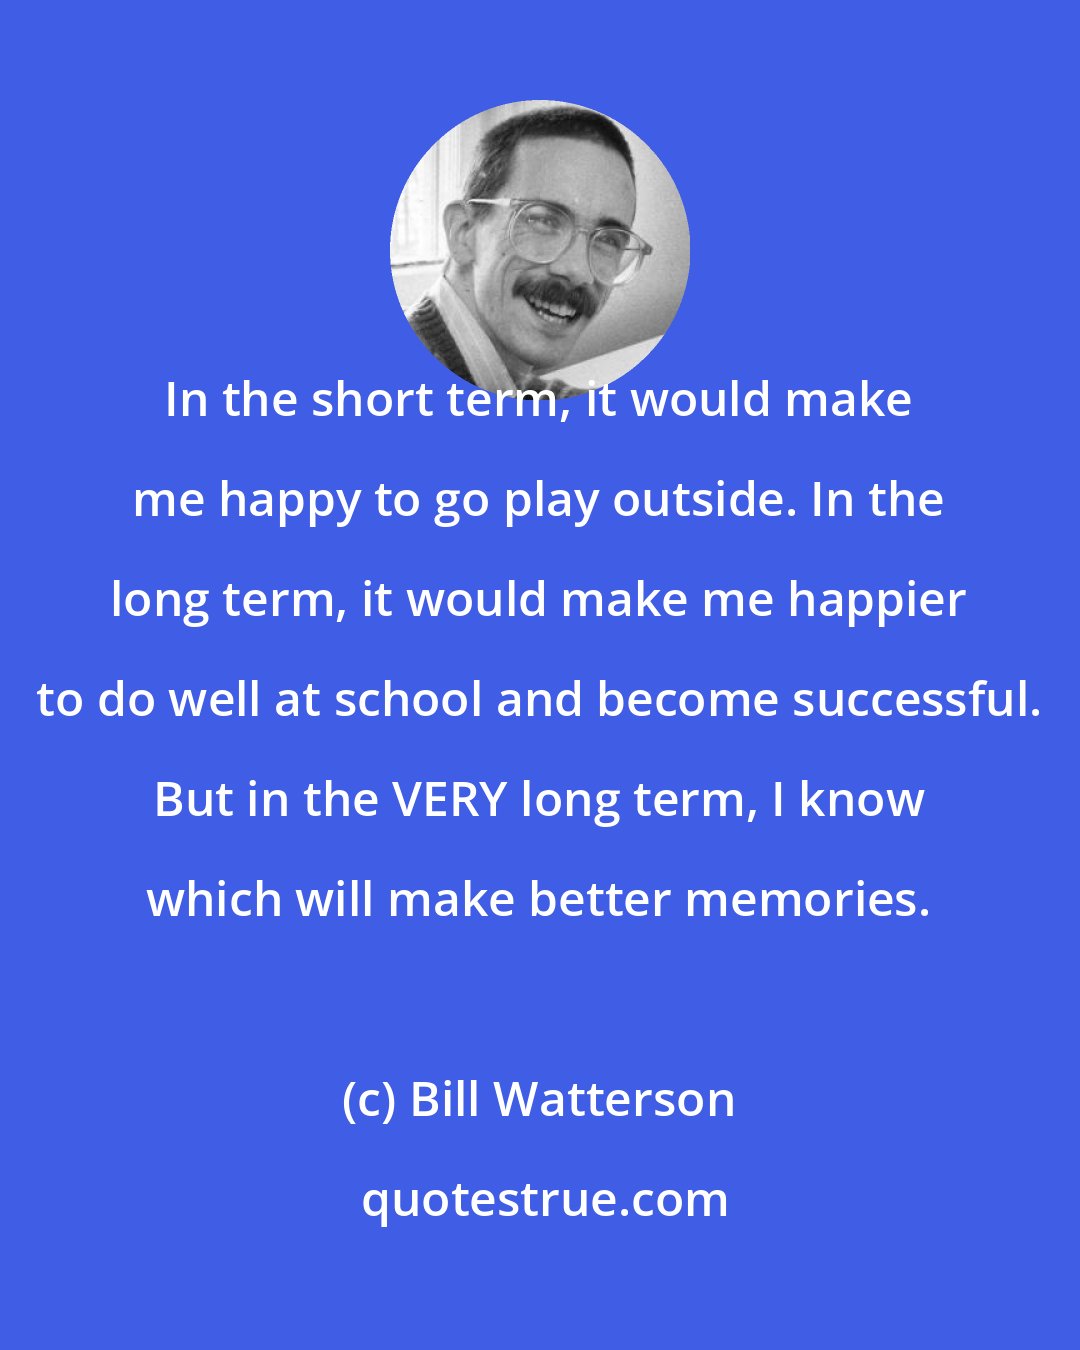 Bill Watterson: In the short term, it would make me happy to go play outside. In the long term, it would make me happier to do well at school and become successful. But in the VERY long term, I know which will make better memories.